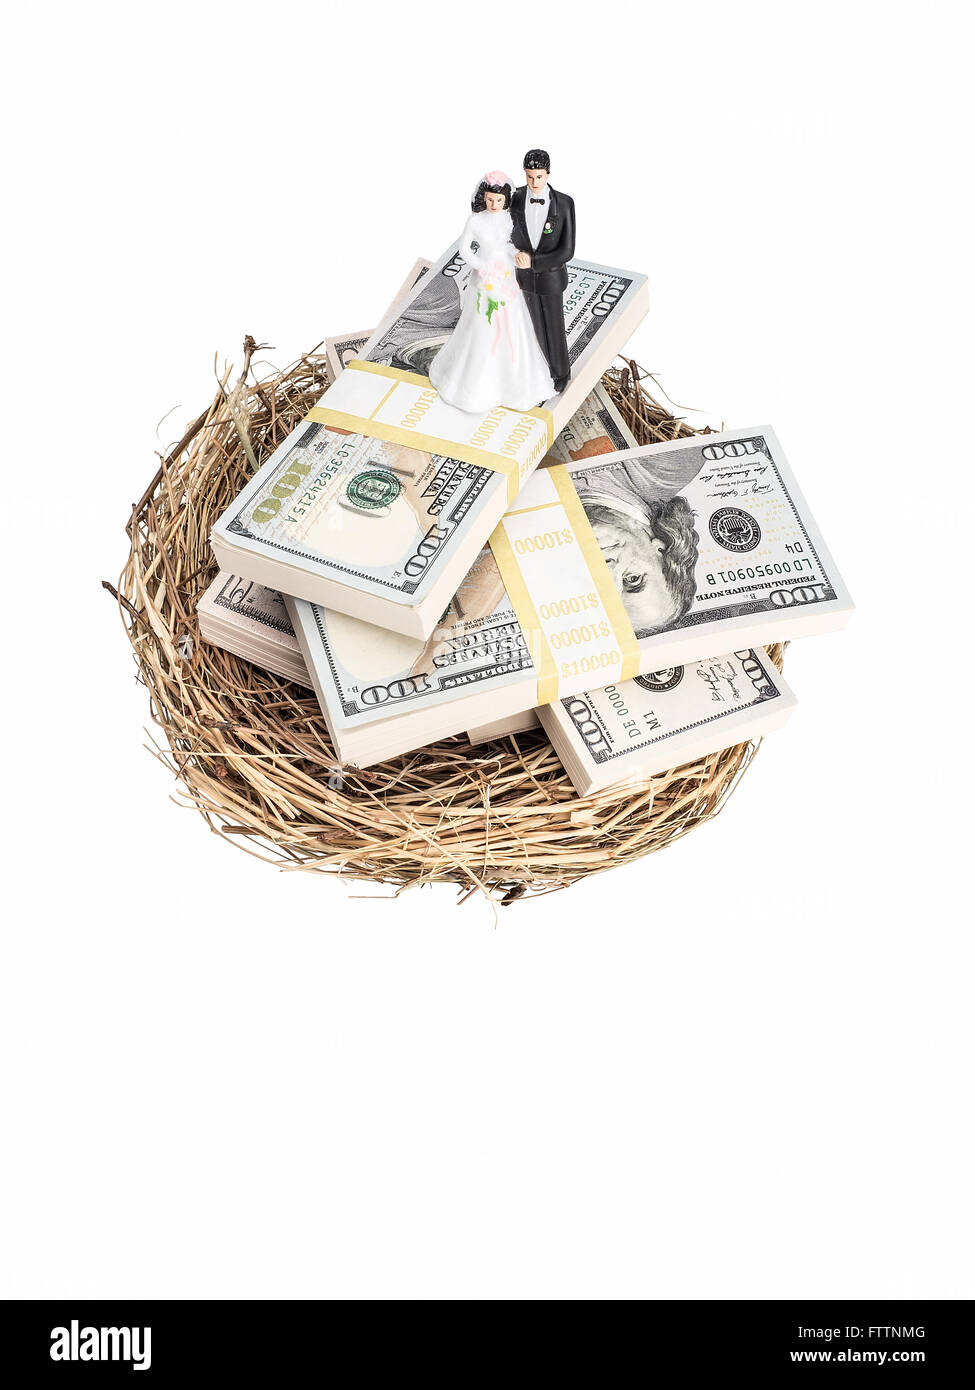 Photograph of bride and groom figurines standing on top of stacks of U.S. paper currency within a bird's nest, suggesting the id Stock Photo